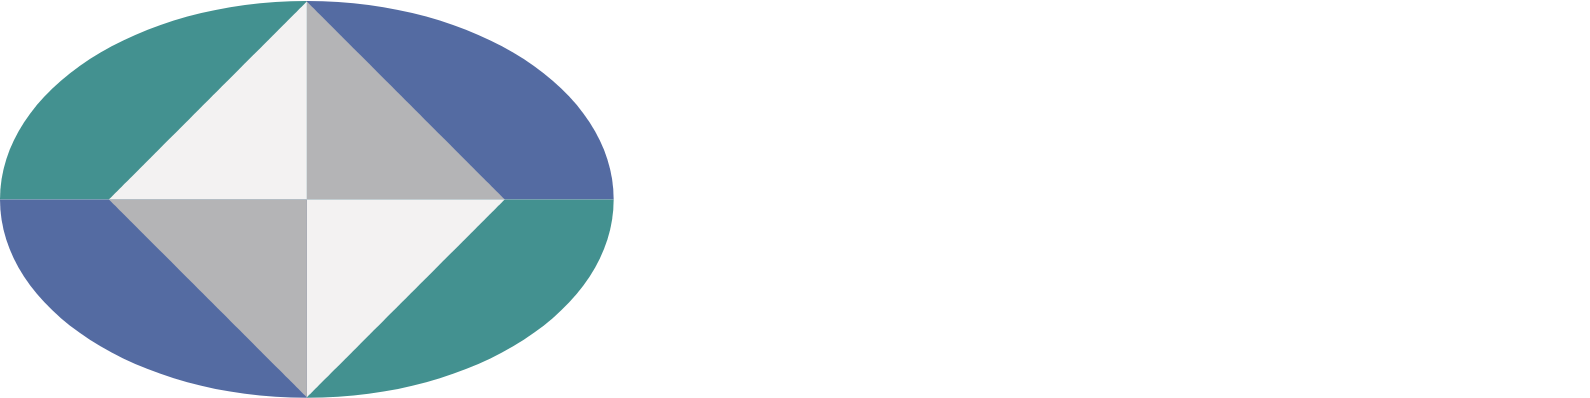 Powerchip Semiconductor Manufacturing logo large for dark backgrounds (transparent PNG)